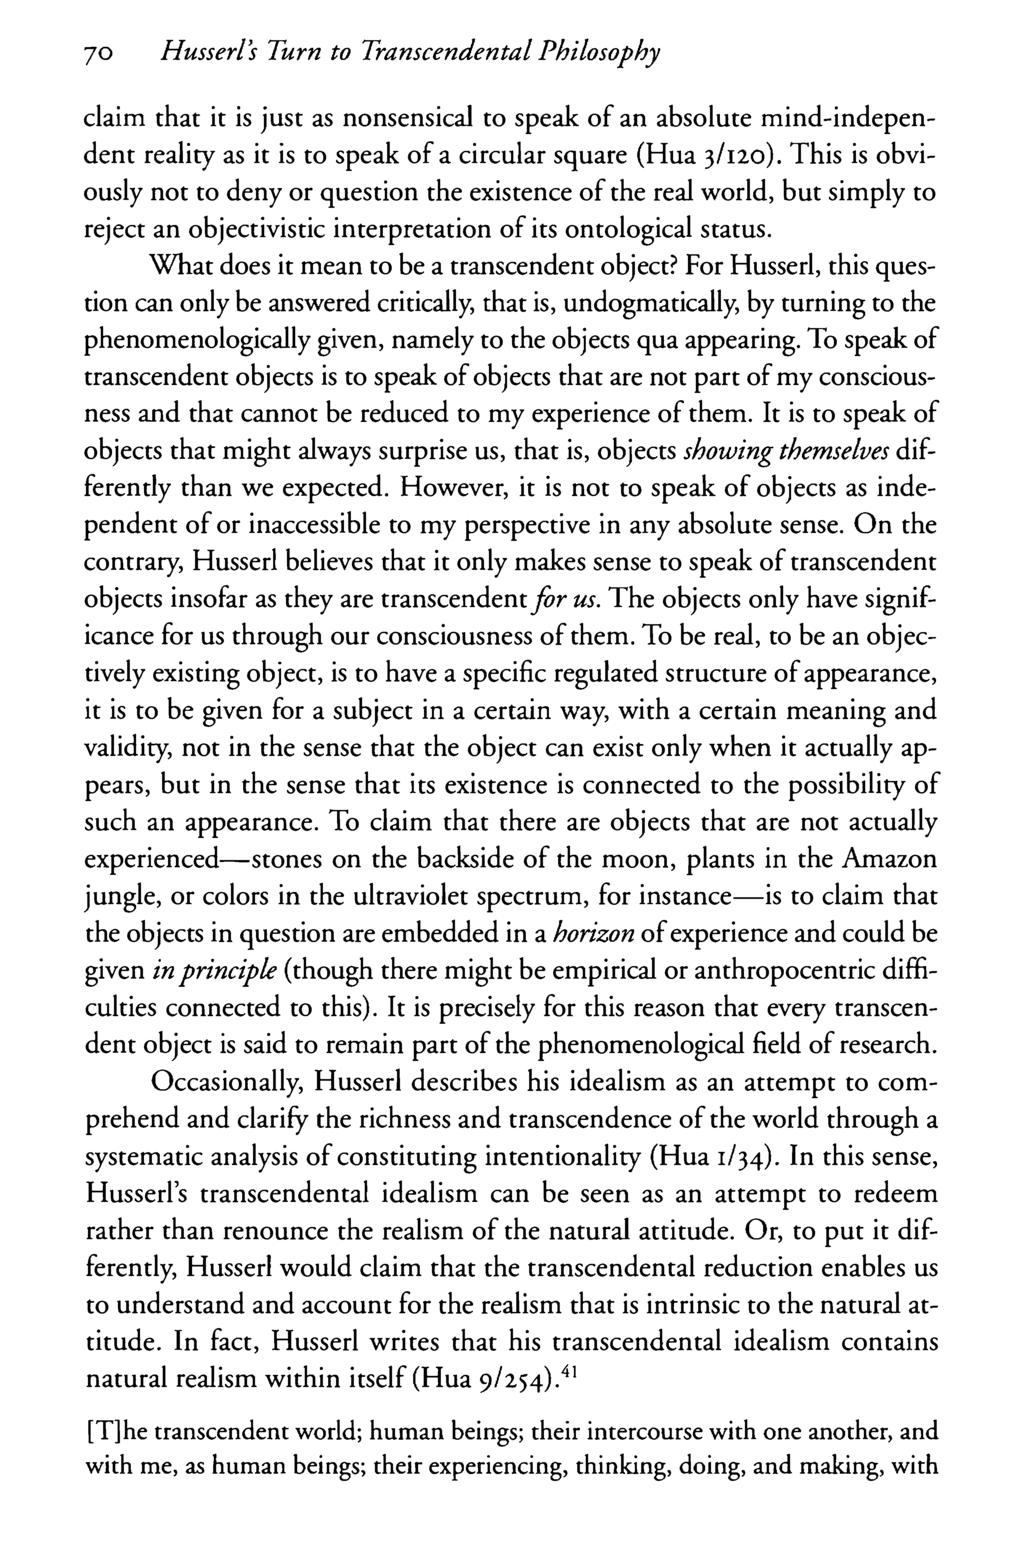 jo HusserVs Turn to Transcendental Philosophy claim that it is just as nonsensical to speak of an absolute mind-independent reality as it is to speak of a circular square (Hua 3/120).